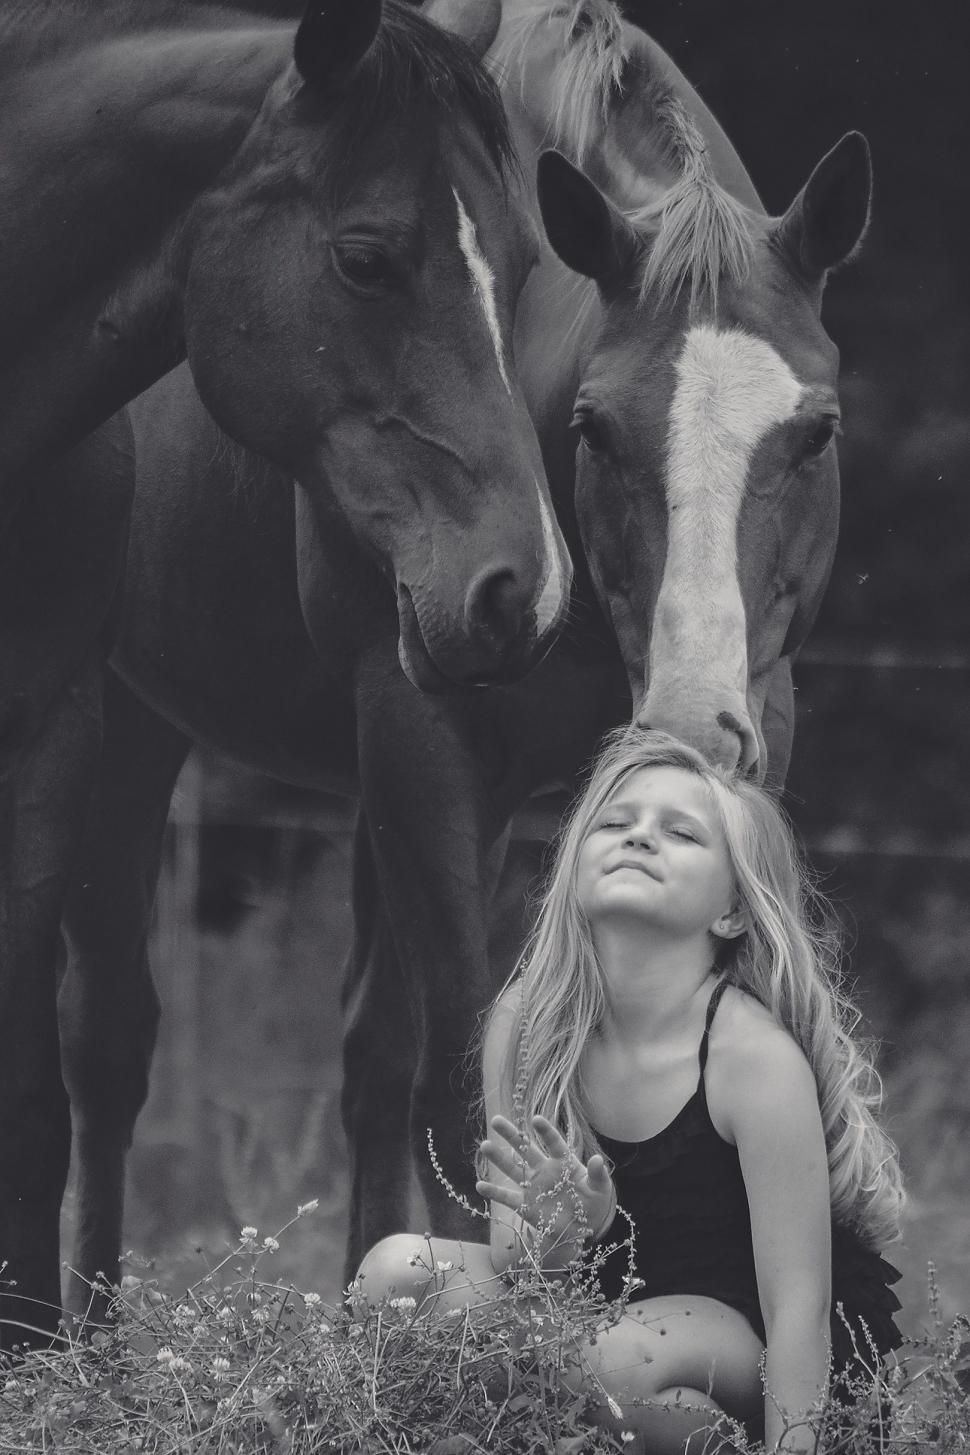 Free Image of Young Girl and Two Horses - Friendship 